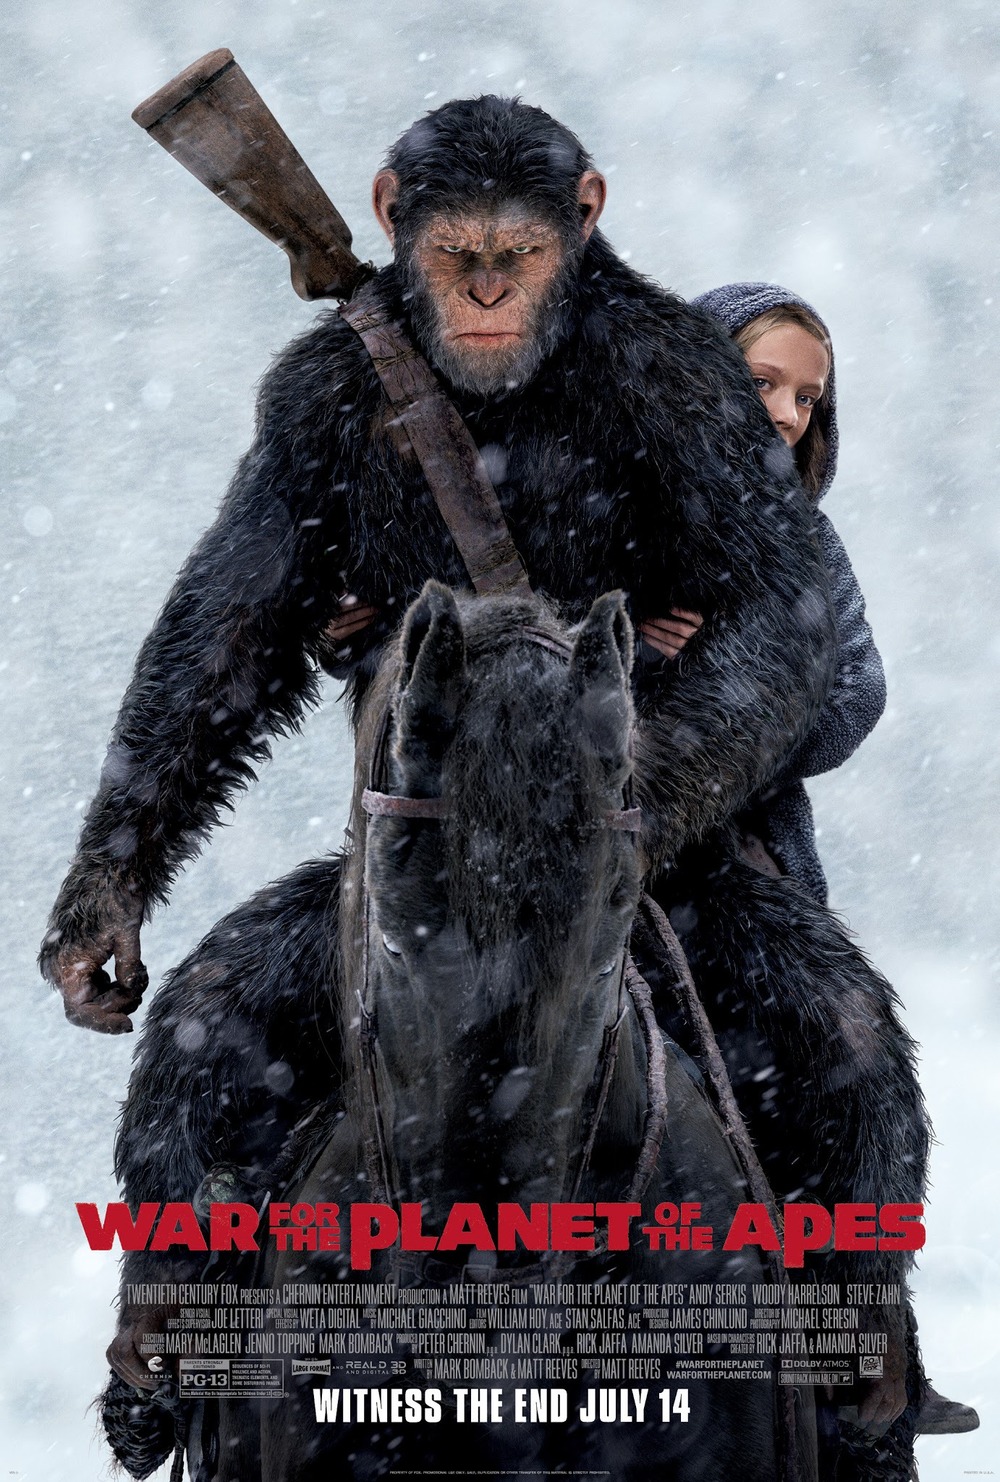 Watch War For The Planet Of The Apes War for the Planet of the Apes DVD Release Date | Redbox, Netflix